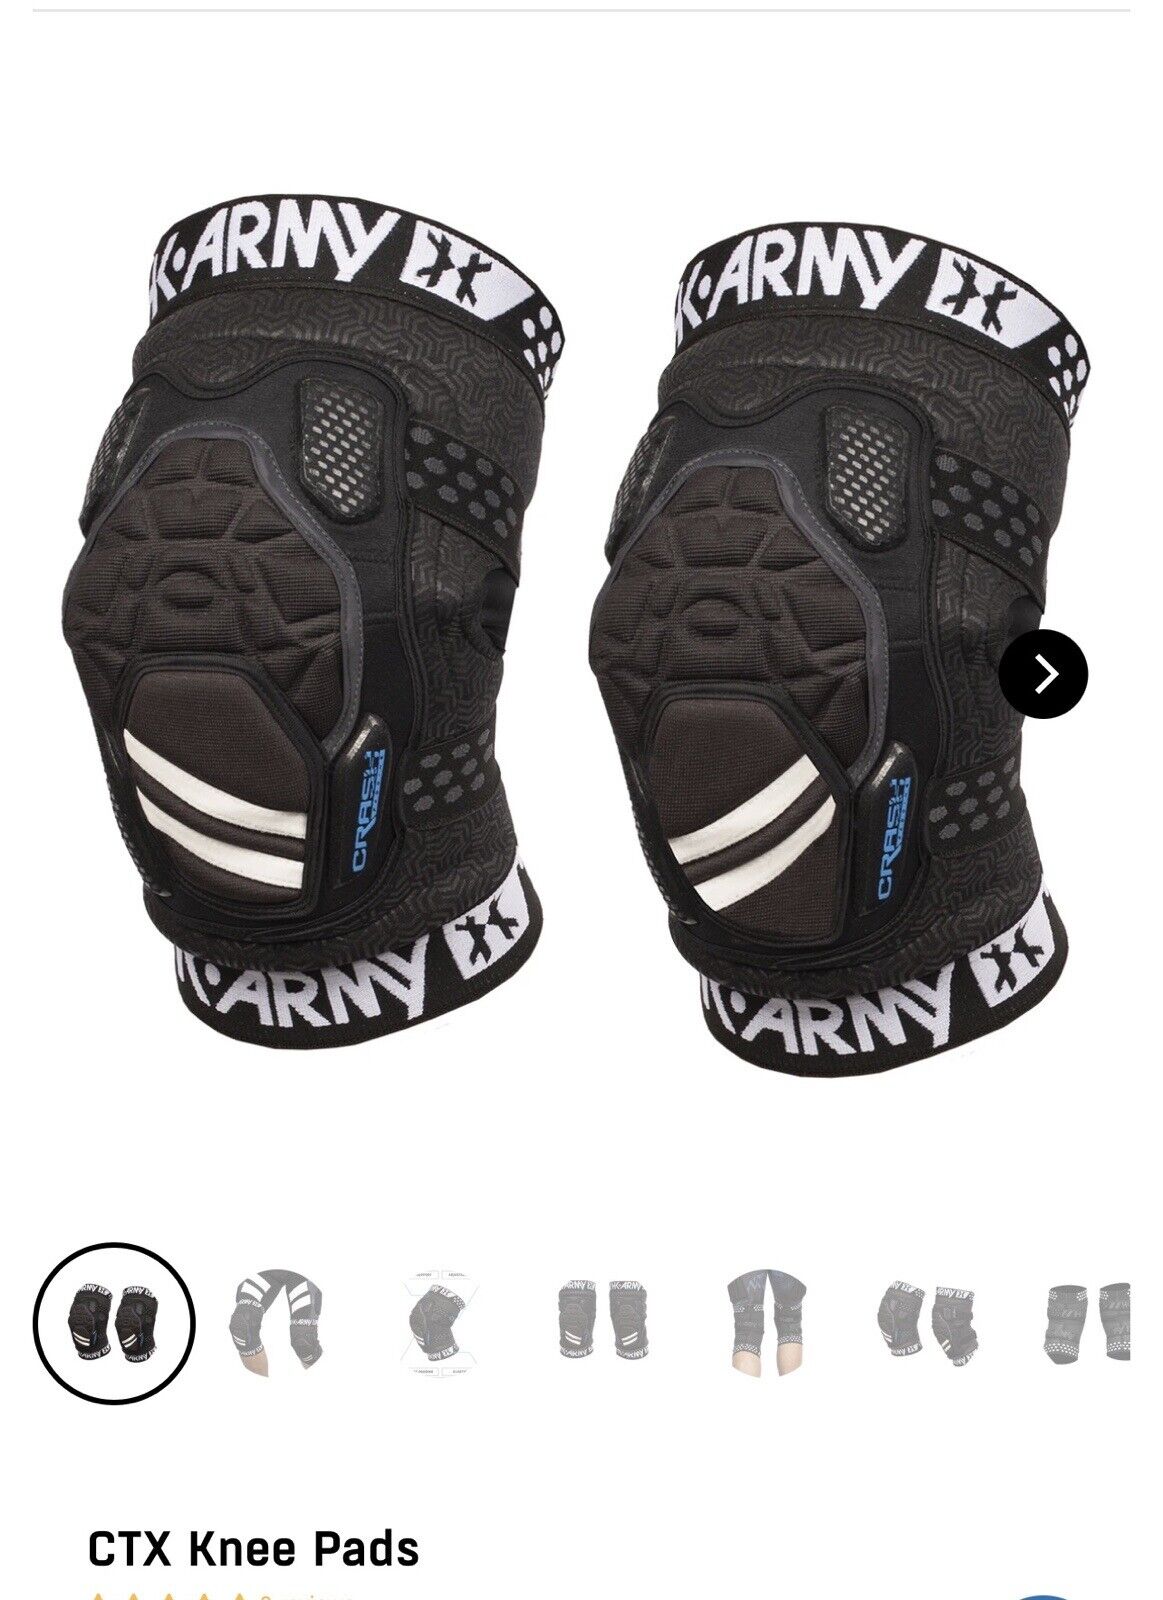 Hk Army Ctx Knee Pads - Black / Blue Size: Medium/large / Xl( Message For Size